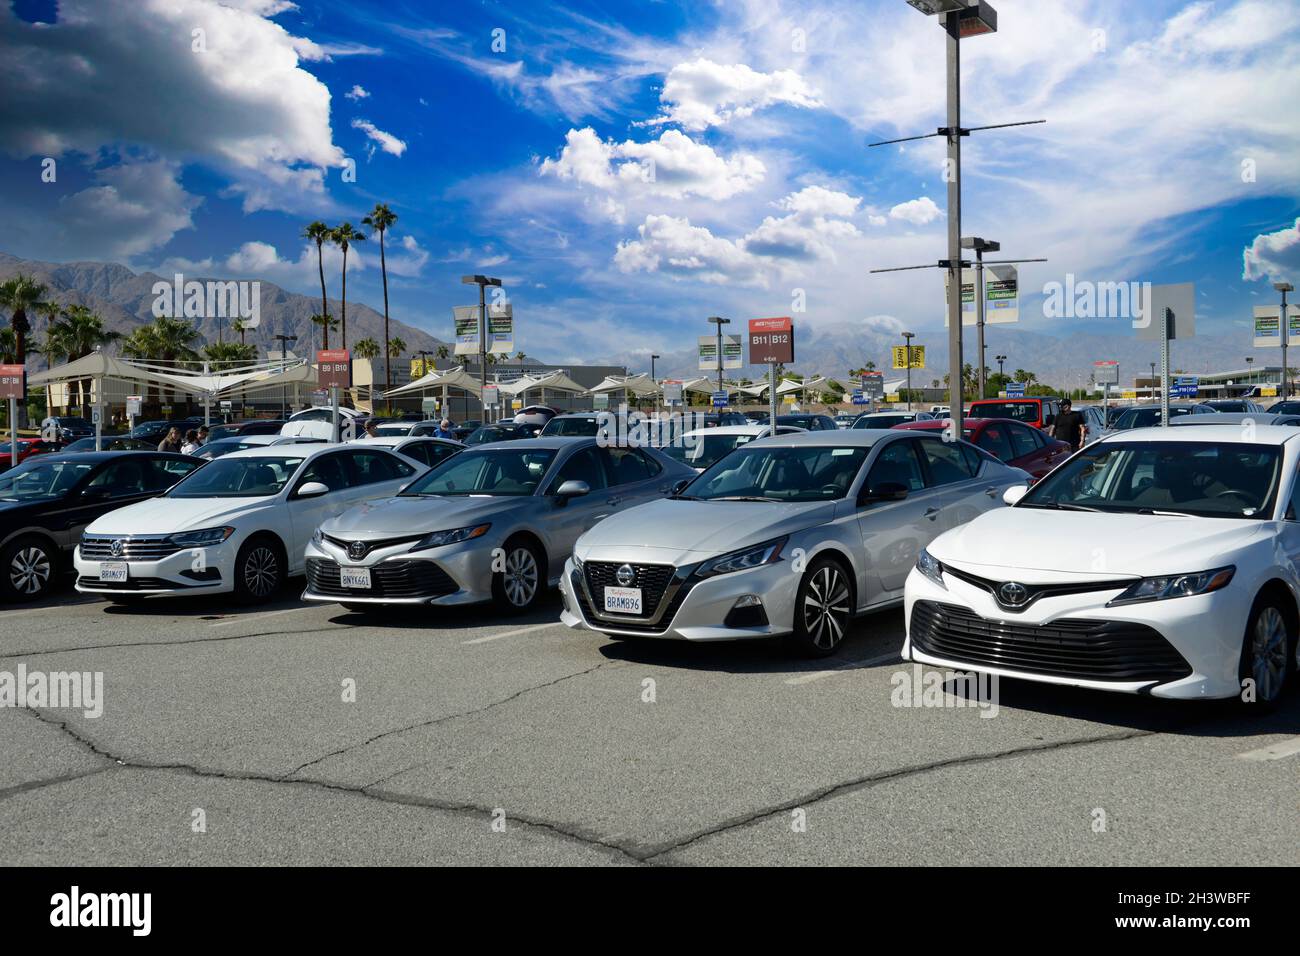 Car Rental vehicles parked at Palm Springs International Airport, California Stock Photo